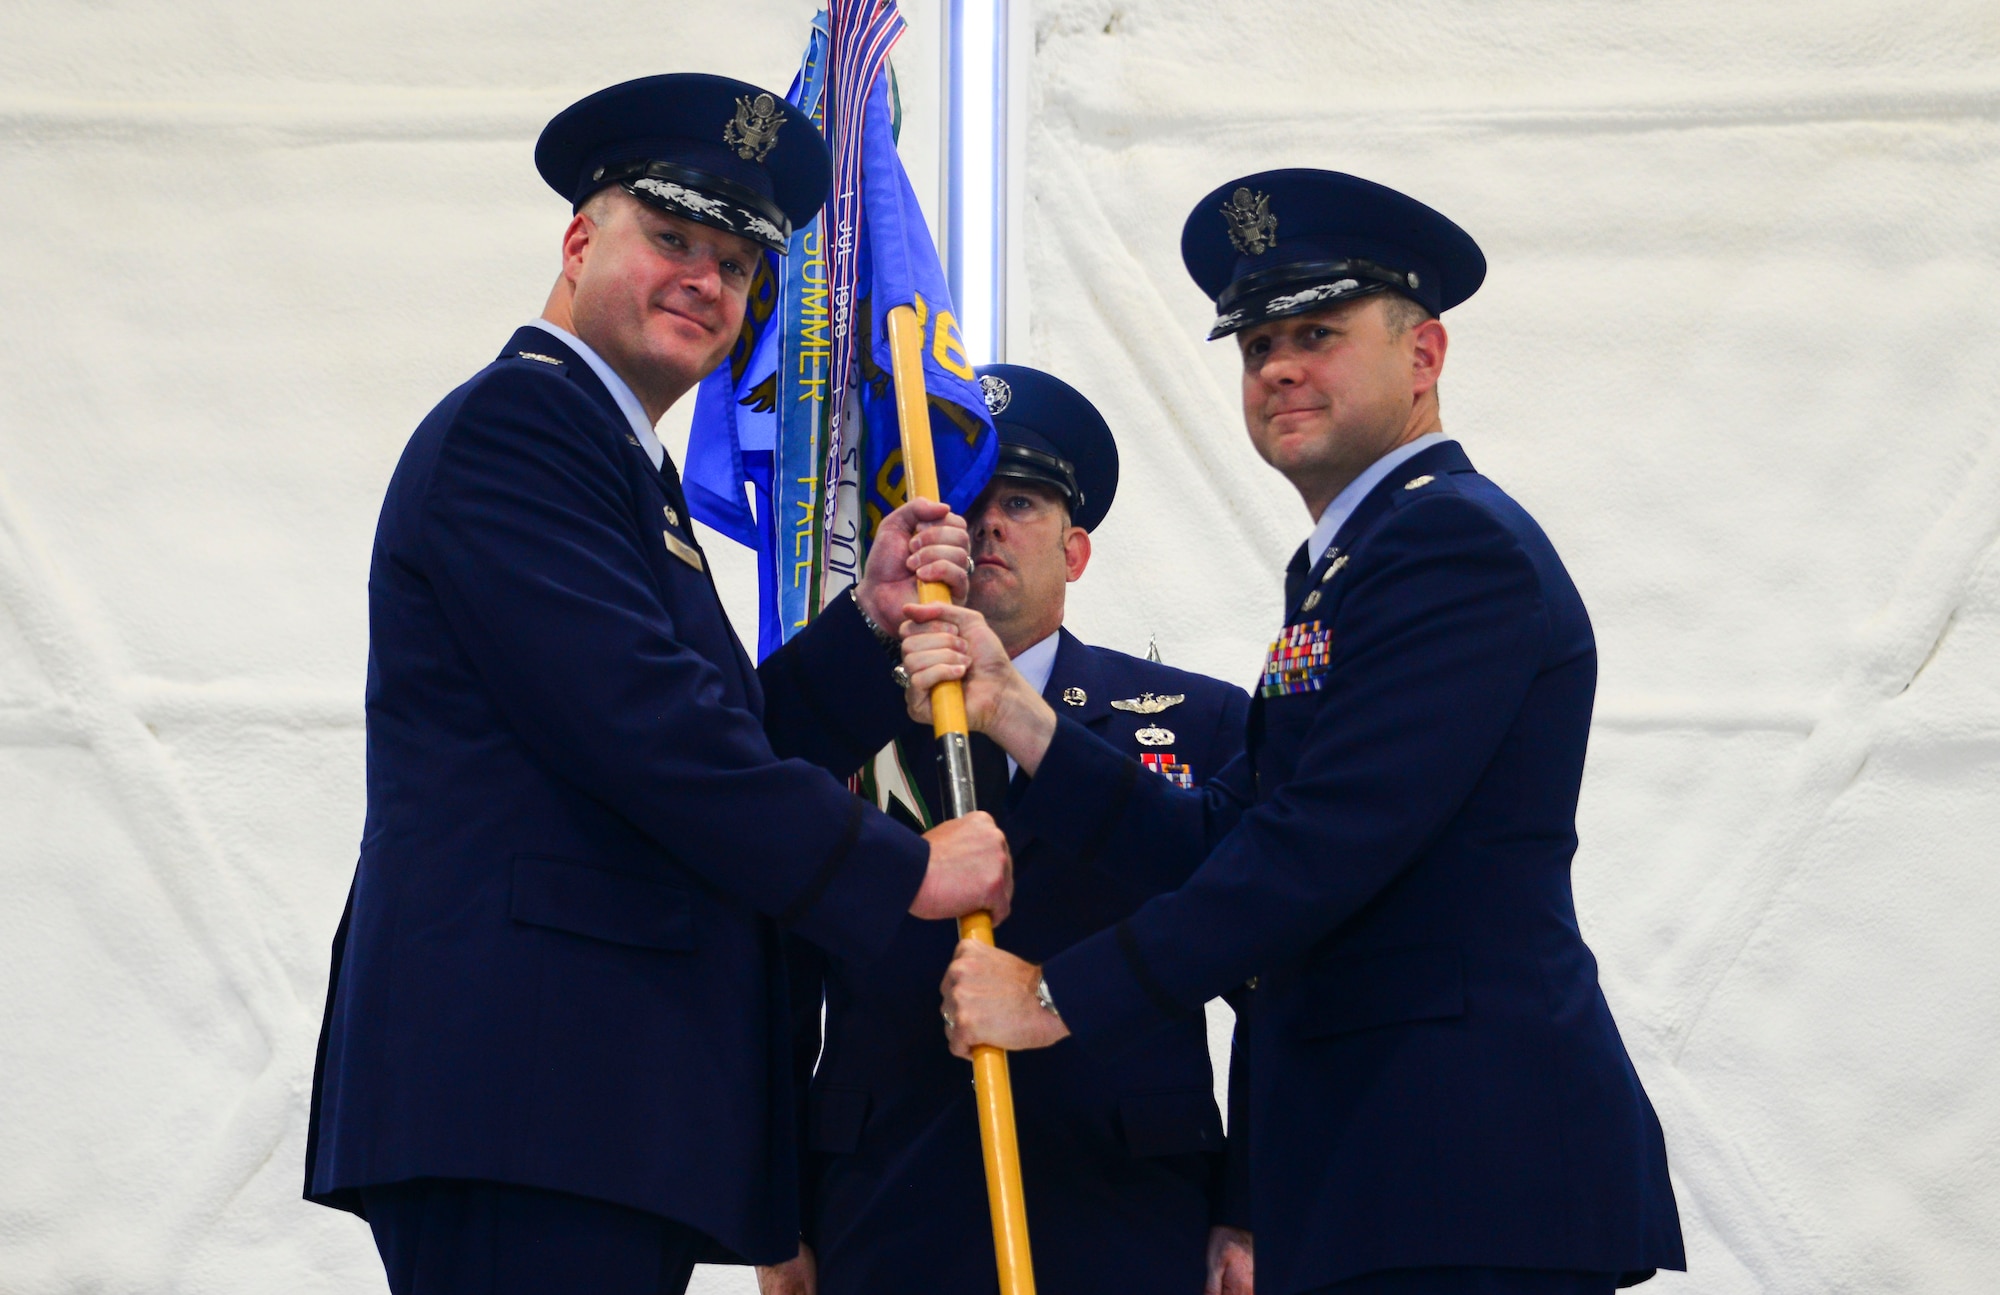 Col. Richard Carrel, 59th Operations Group commander, passes the 36th Rescue Squadron guidon to Lt. Col. Chad Kohout, 36th RQS commander, during a change of command ceremony July 7, 2017, at Fairchild Air Force Base, Washington. Kohout assumed command from Lt. Col. Jason Snyder. (U.S. Air Force photo/Senior Airman Janelle Patiño)